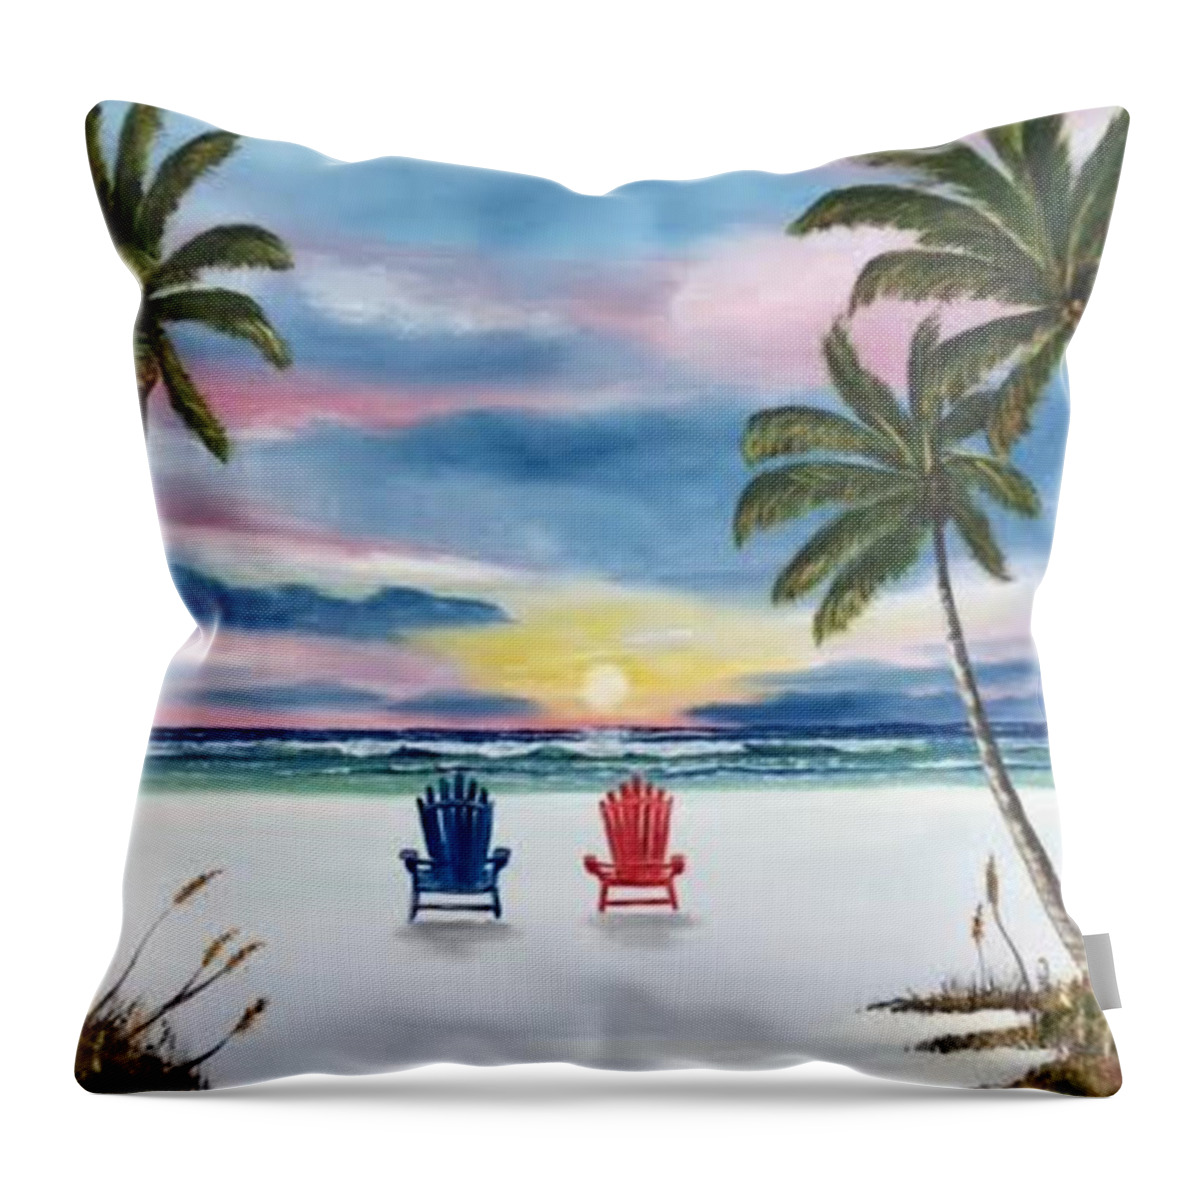 Adirondack Chairs Throw Pillow featuring the painting Our Spot At Sunset by Lloyd Dobson